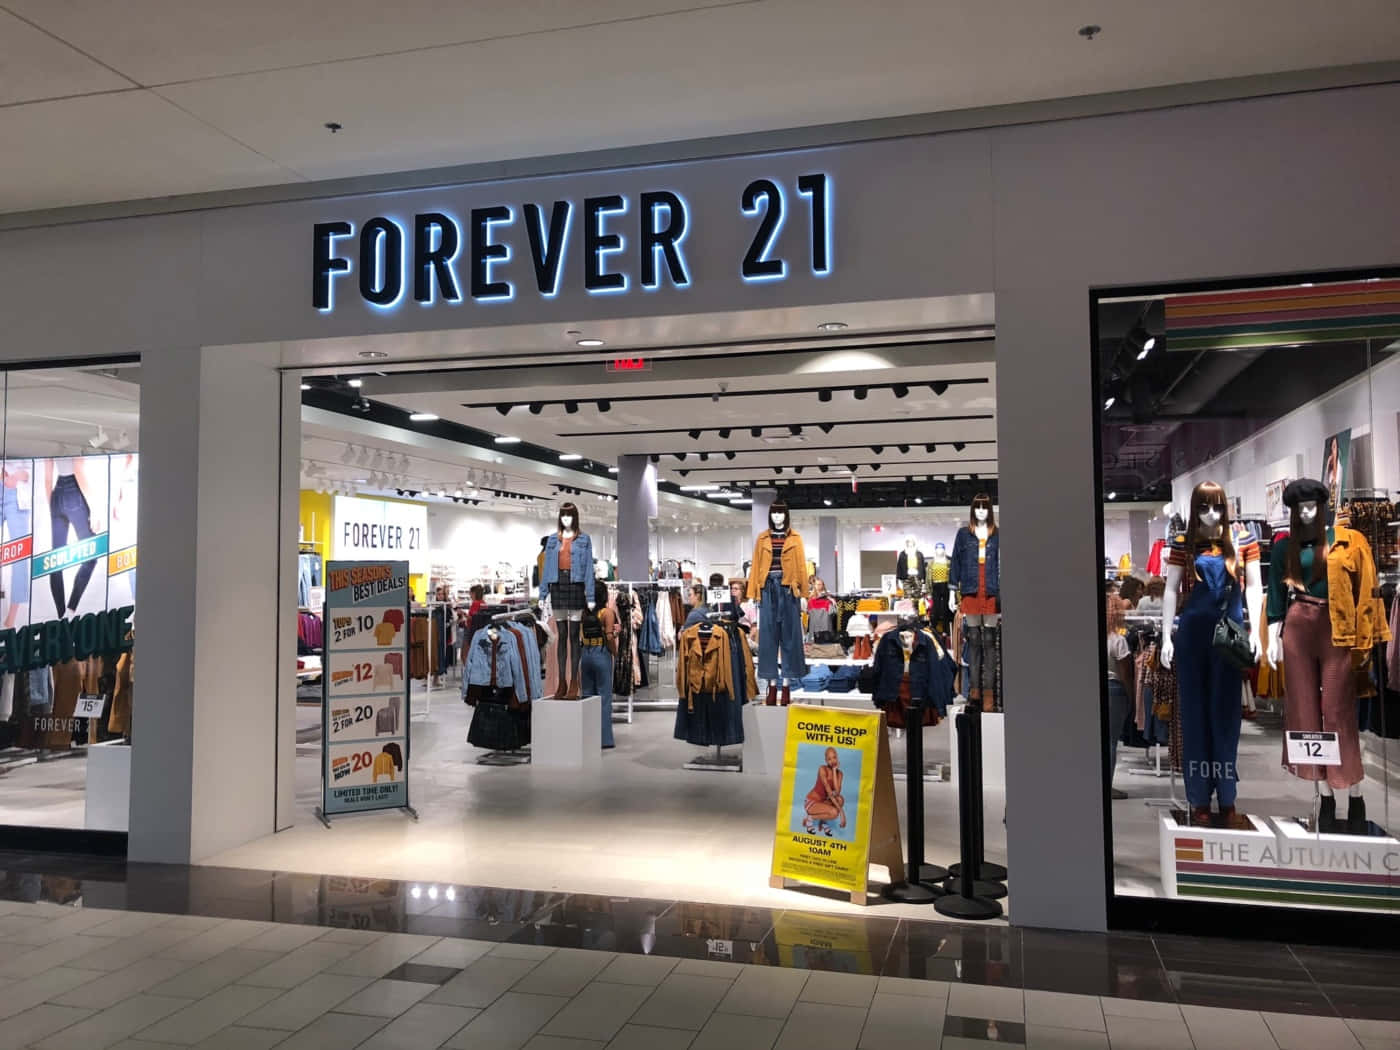 Shop the latest styles with Forever 21!